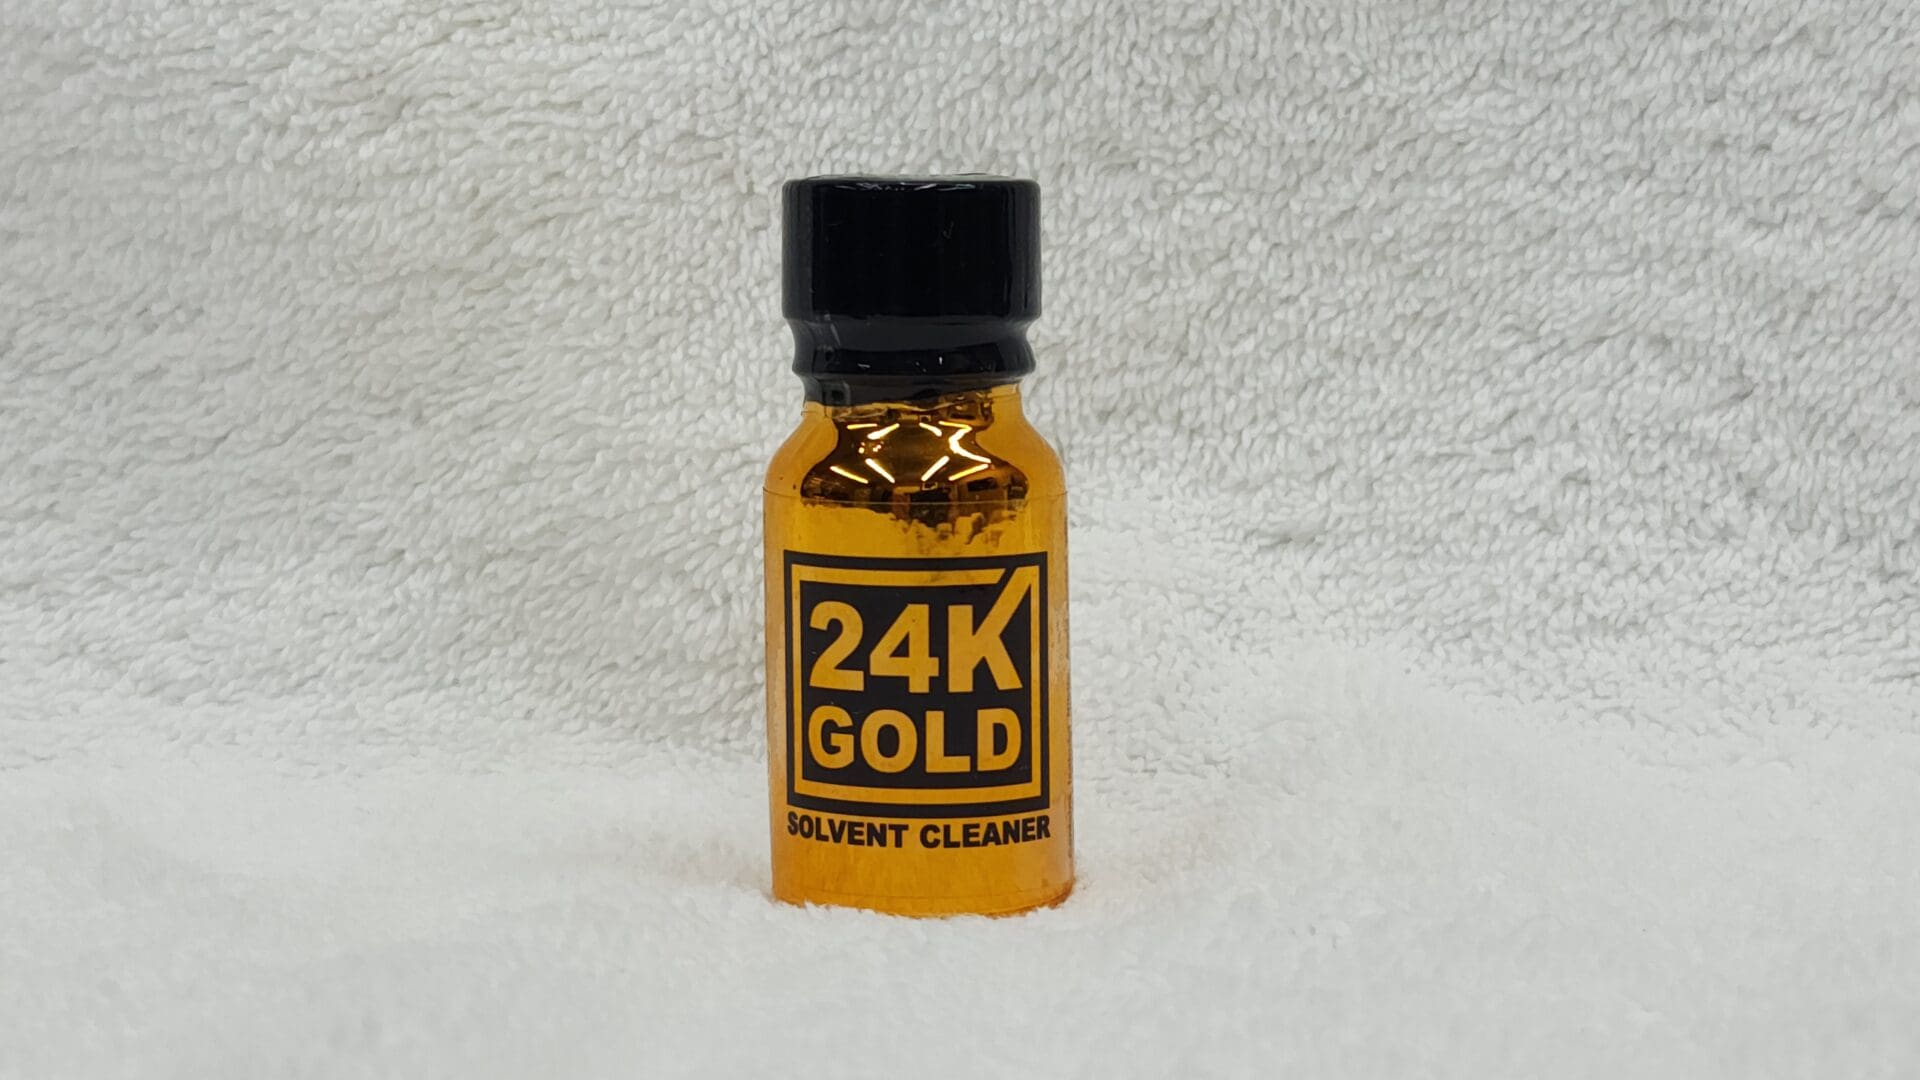 Sentence with product name: Small bottle labeled "24K Gold" on a white textured background.